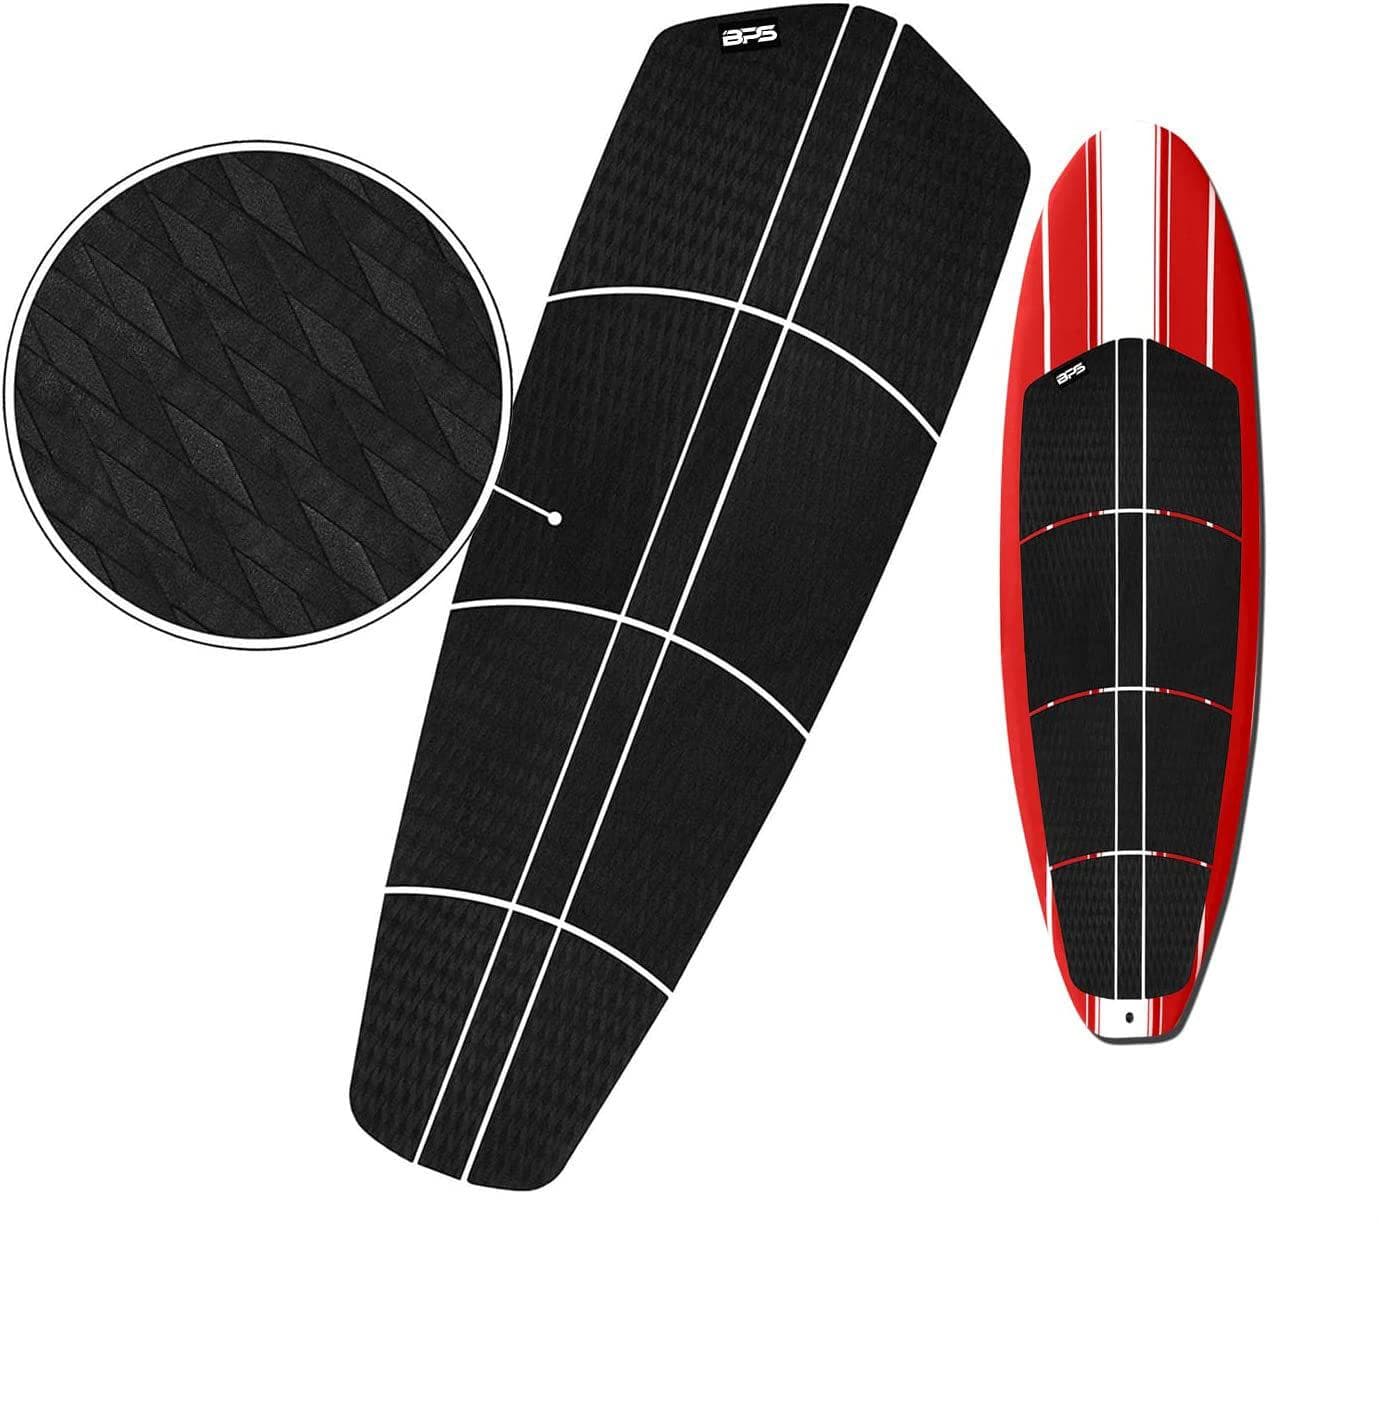 SUP Surfboard Anti Rutsch Footpad for Water Sports Surfing Paddleboard  Traction Pad Deck Grip Non Slip - AliExpress